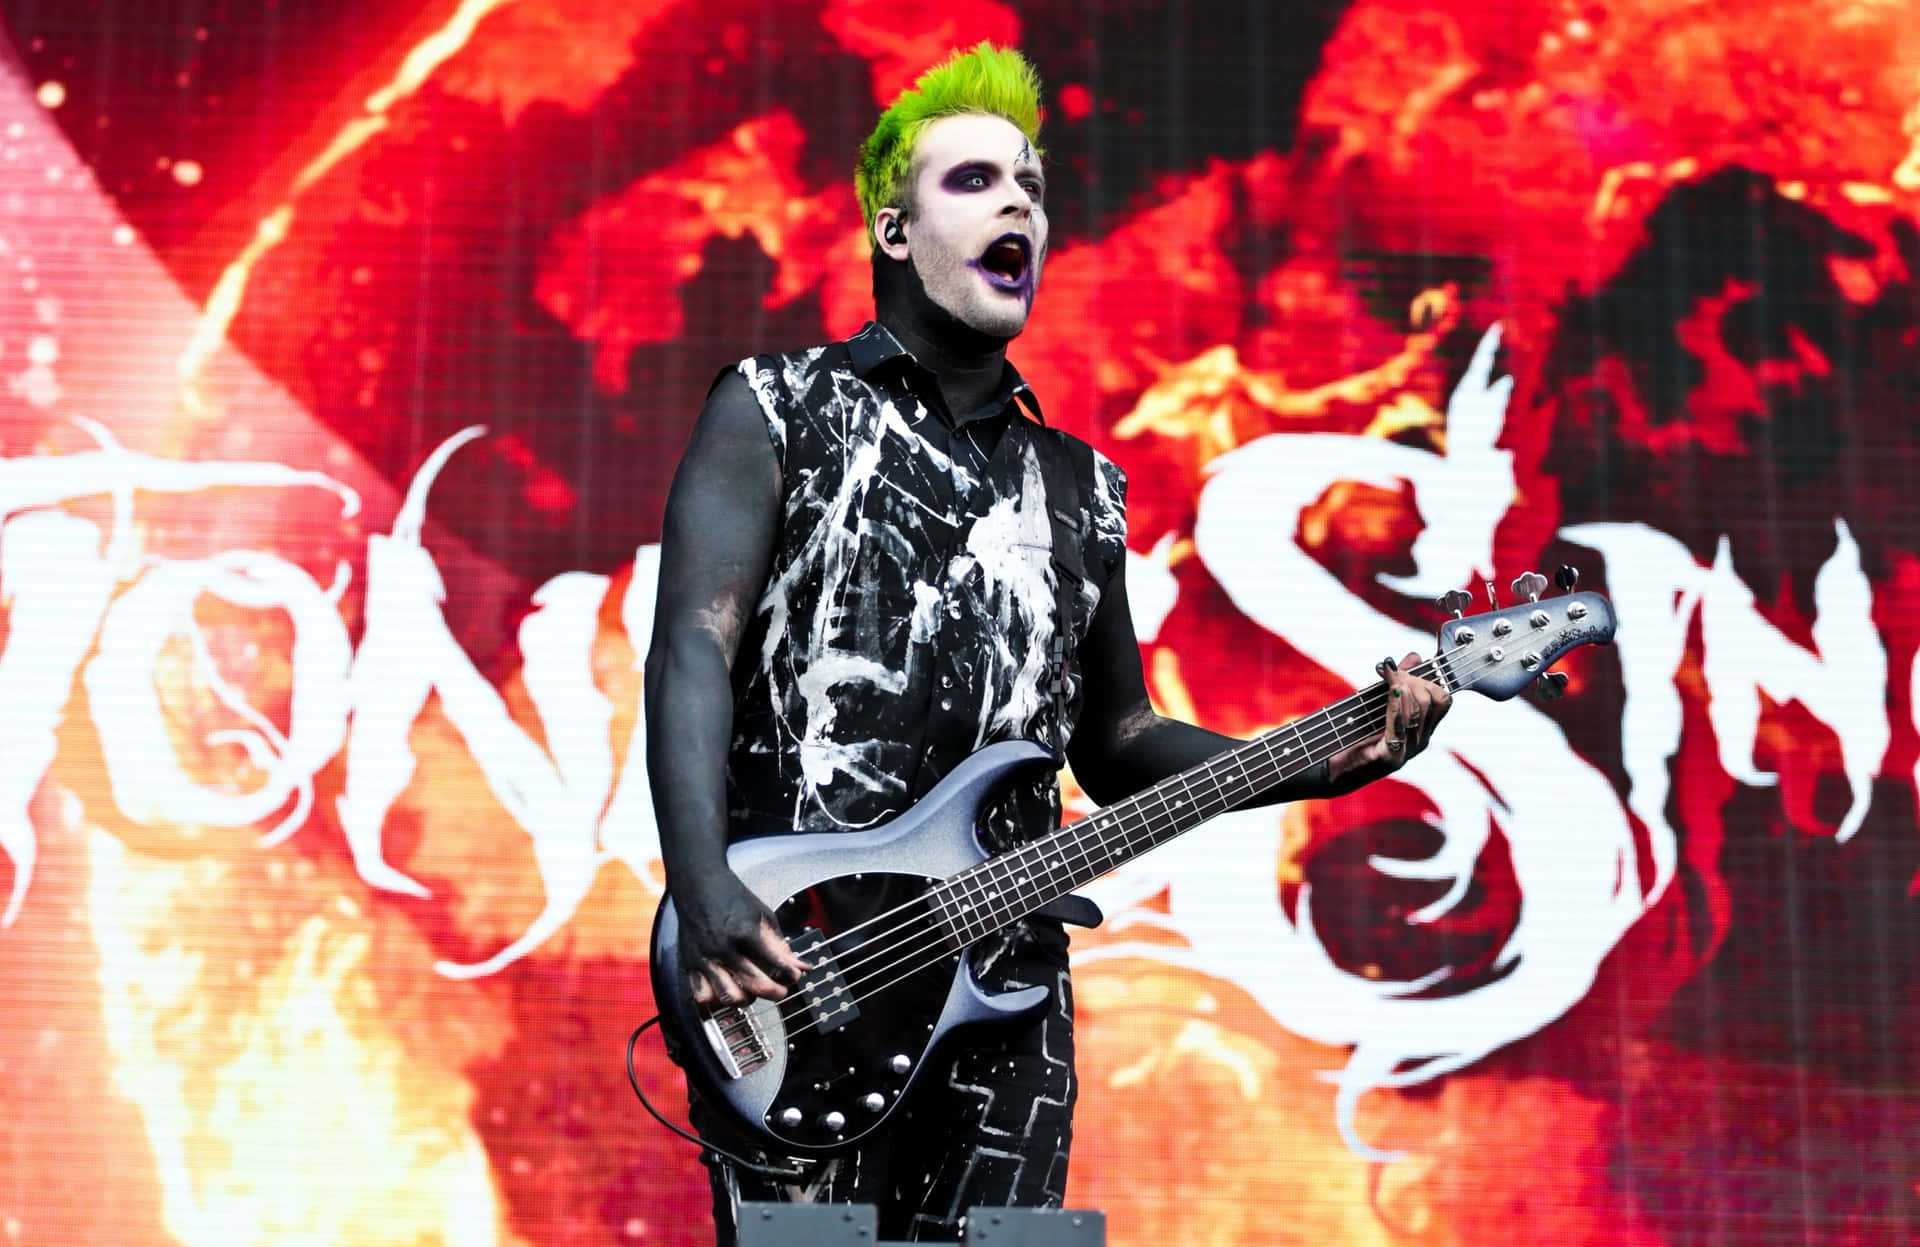 Green Haired Bassist On Stage.jpg Wallpaper